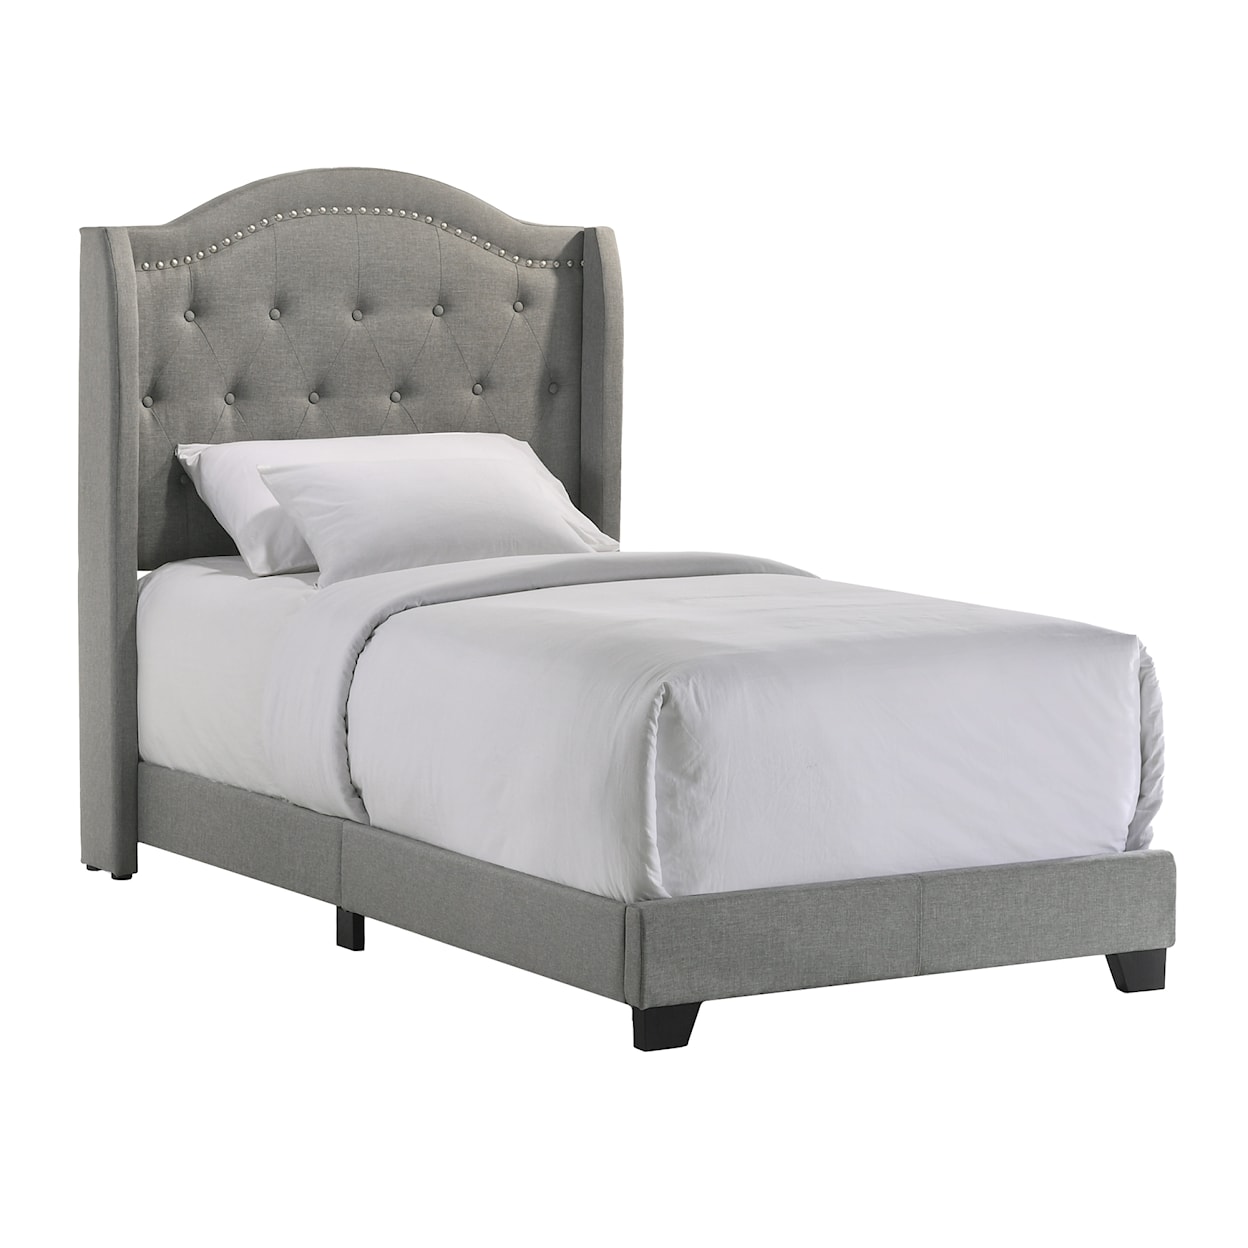 VFM Signature Upholstered Beds Rhyan Twin Upholstered Bed